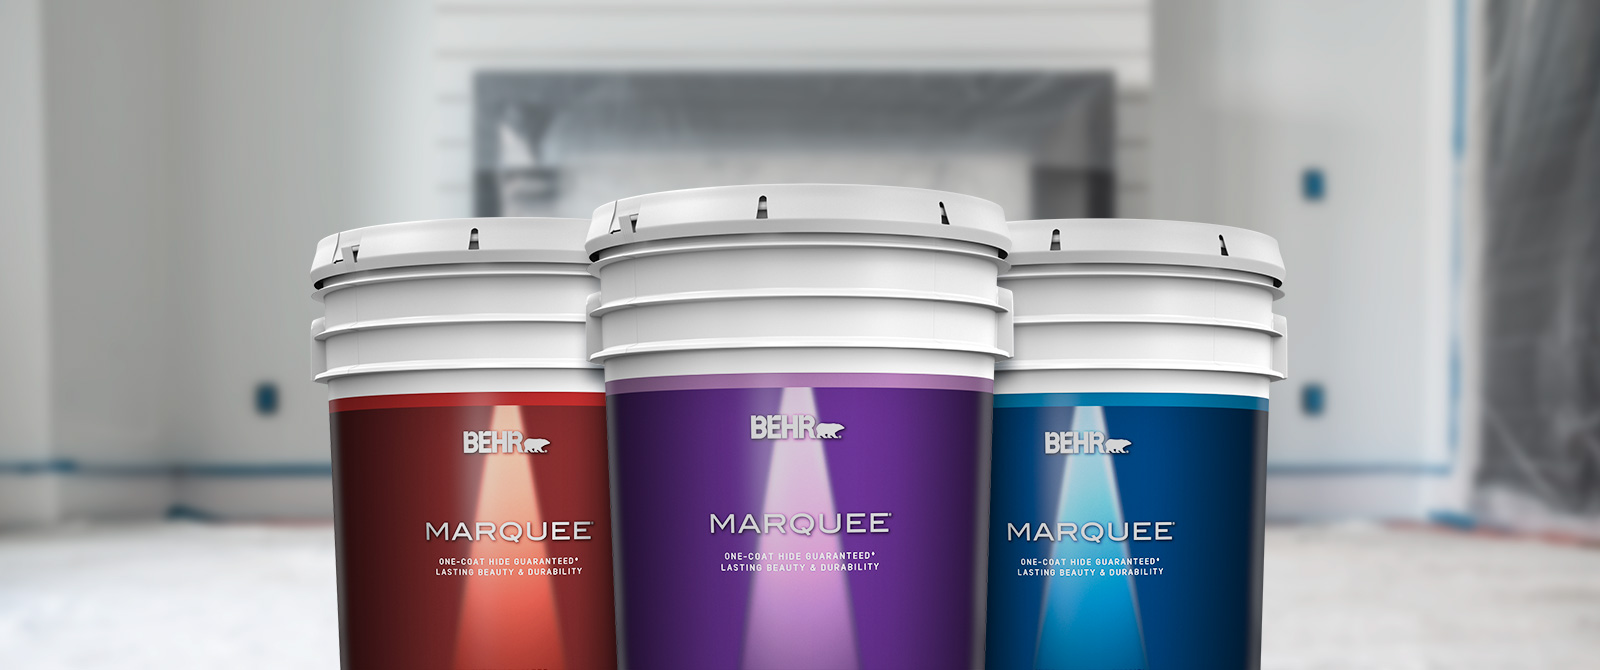 BehrPro interior Marquee products landing page desktop image featuring 5 gallon Marquee cans.